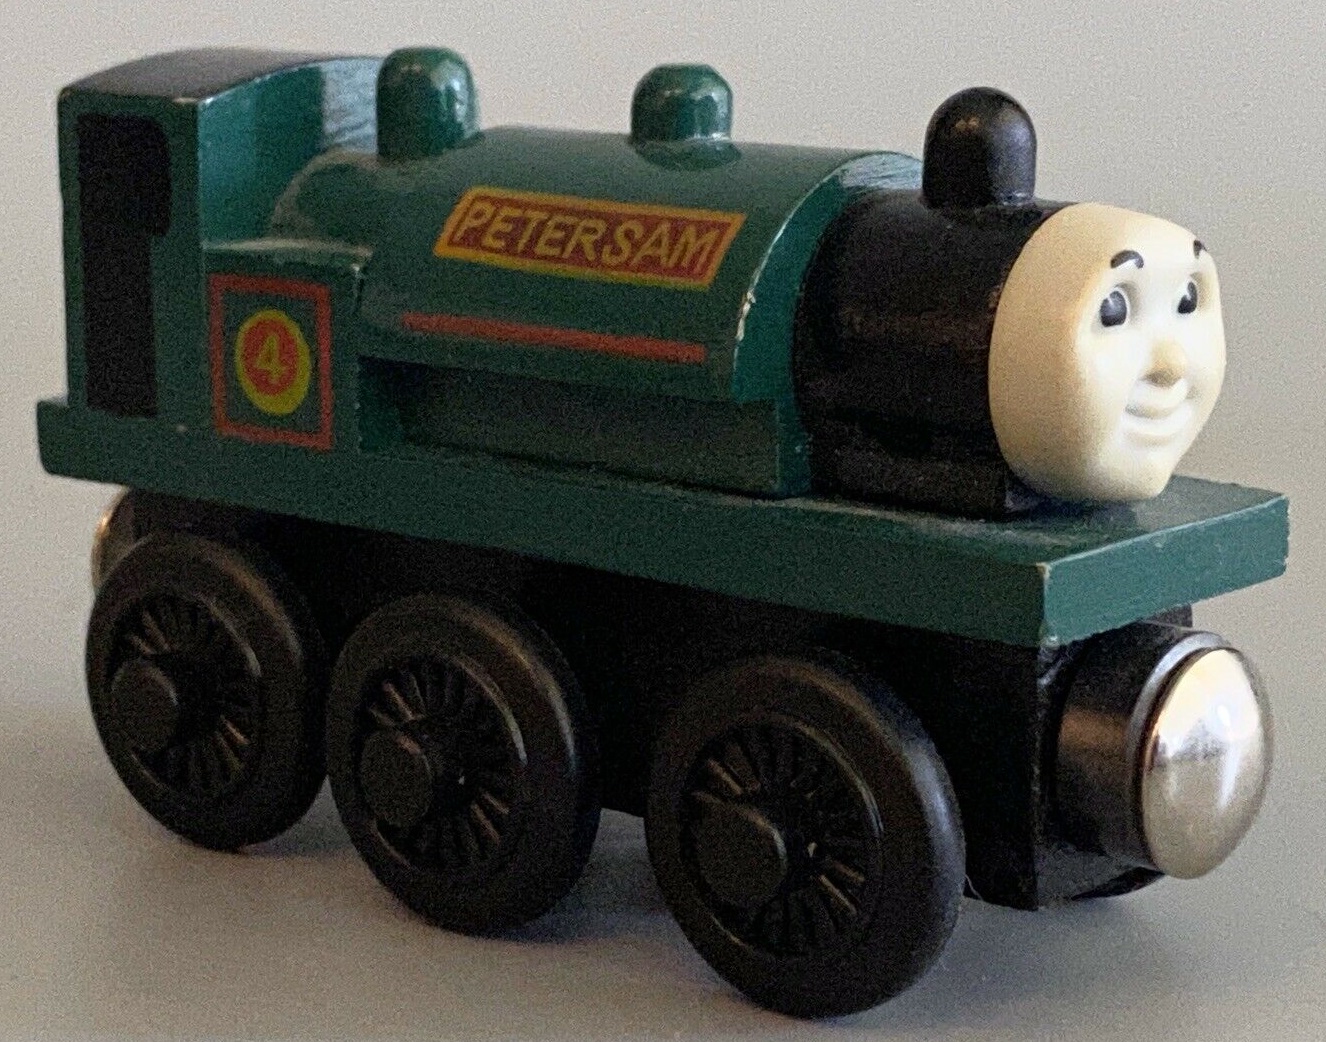 New Thomas And Friends Wooden Railway "Peter Sam" 